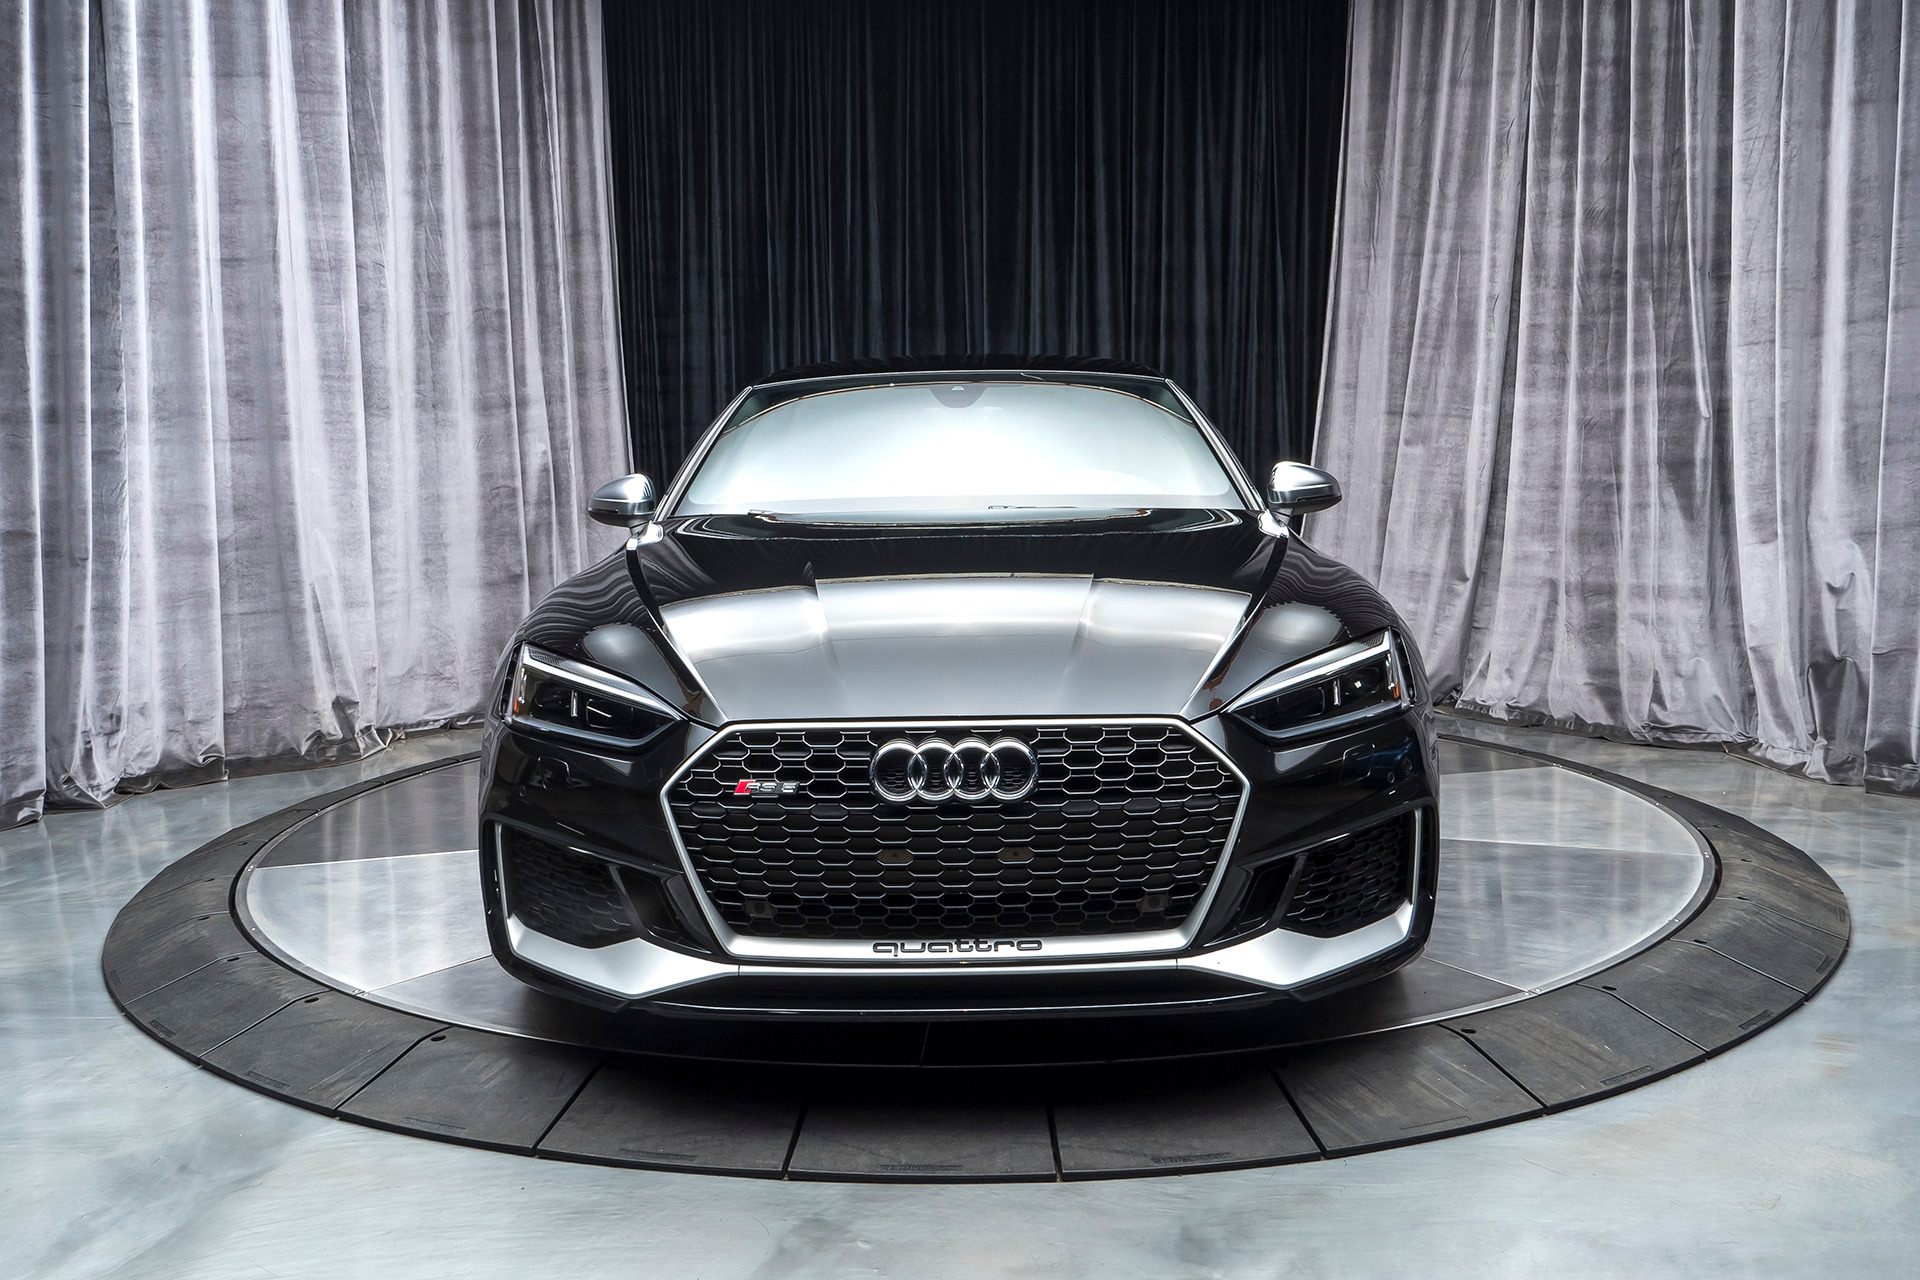 Used-2019-Audi-RS5-29T-quattro-Coupe-MSRP-87K-DYNAMIC-PLUS-PACKAGE